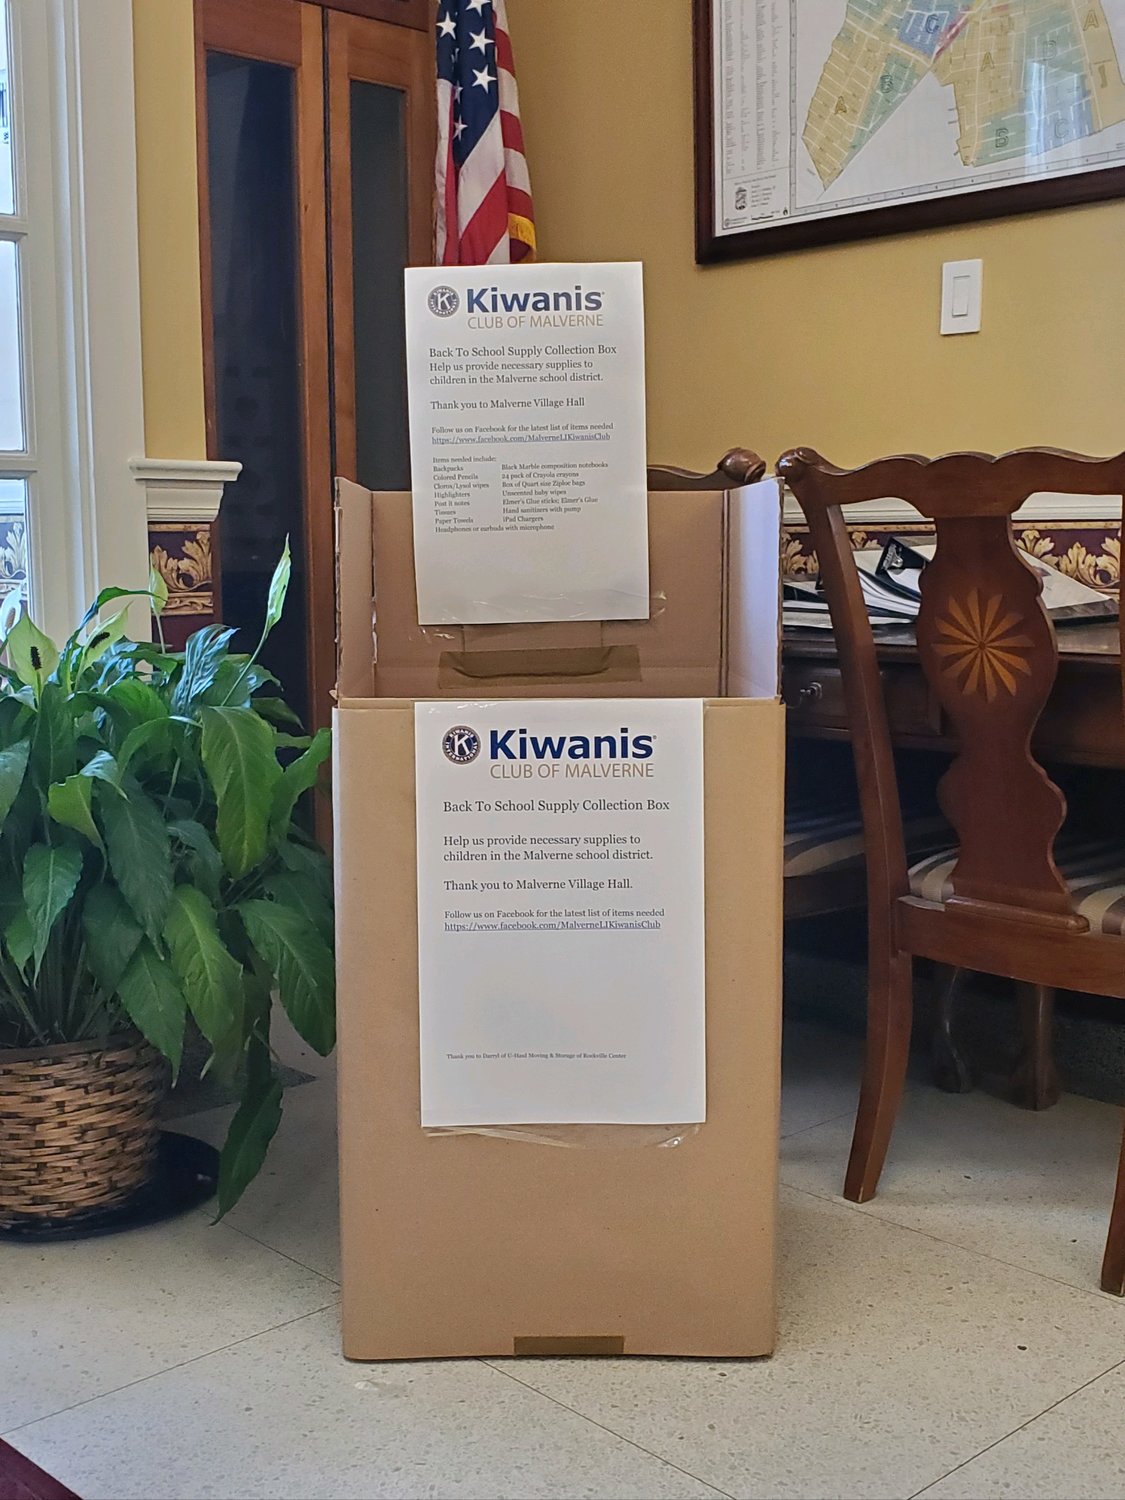 The Kiwanis Club’s school supply collection box at Malverne Village Hall remained mostly empty last Friday.